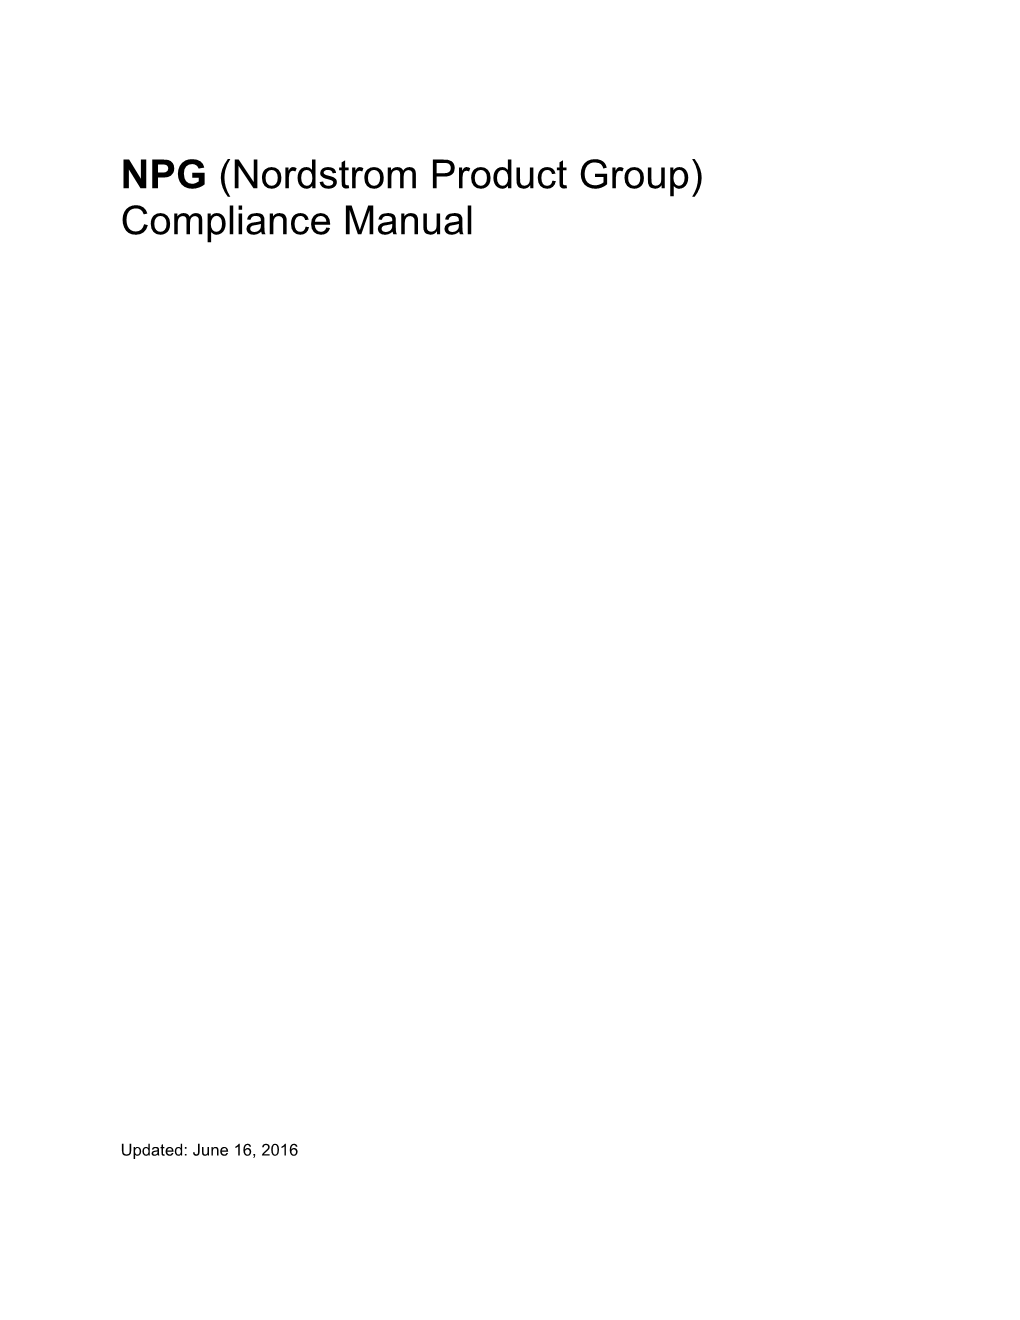 NPG (Nordstrom Product Group) Compliance Manual